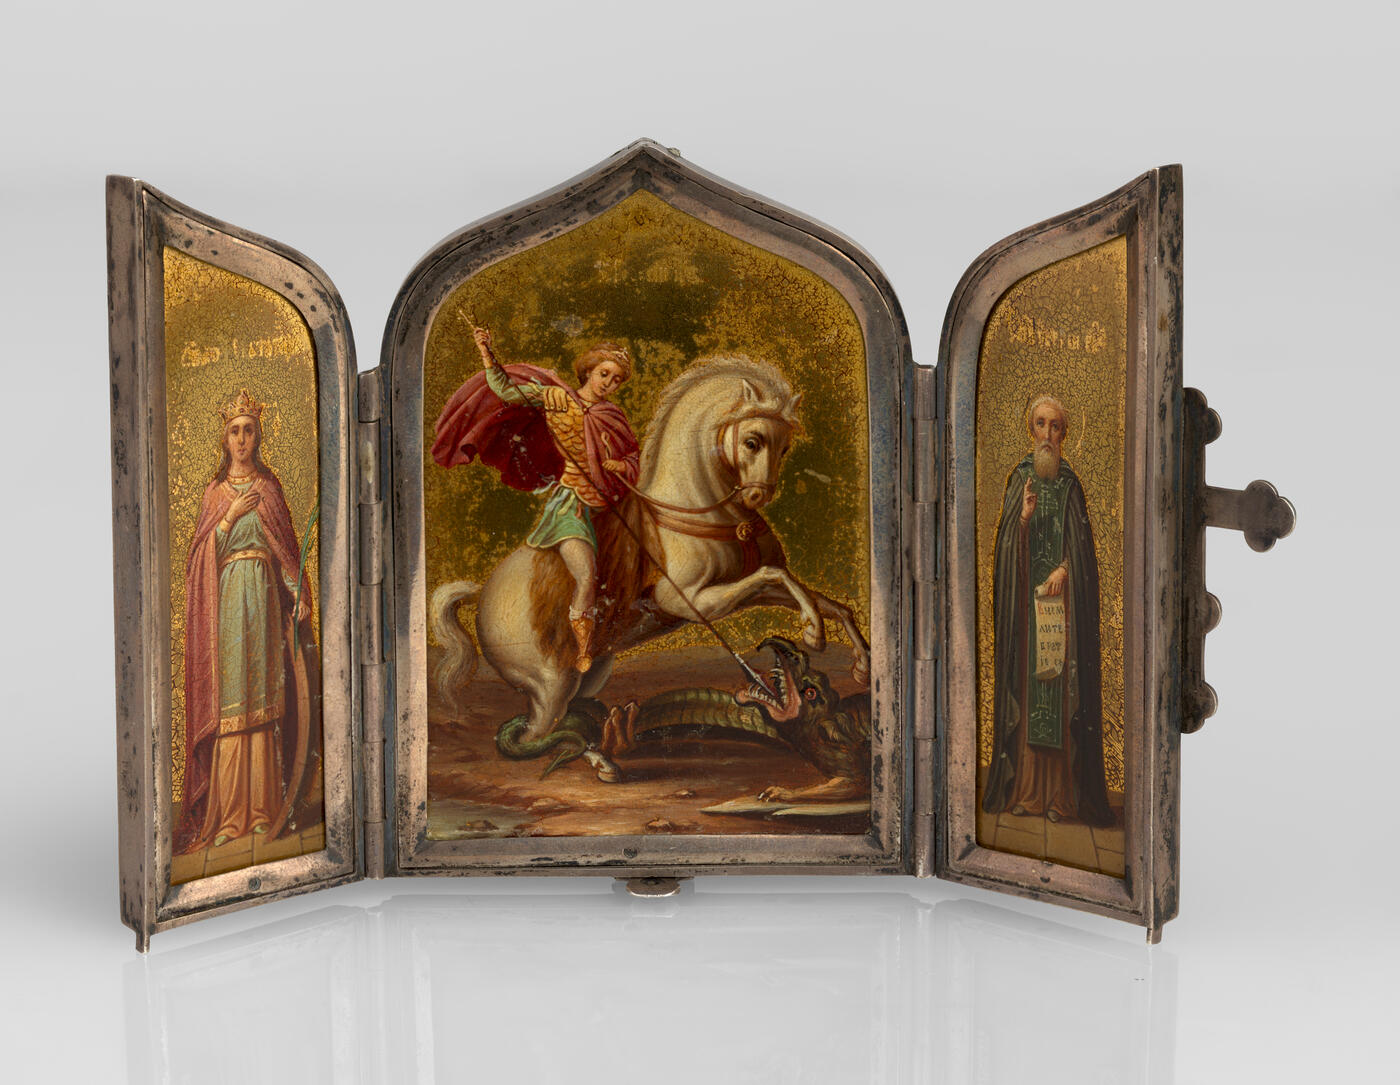 A Presentation Silver Triptych of St Catherine, St George and Sergei of Radonezh